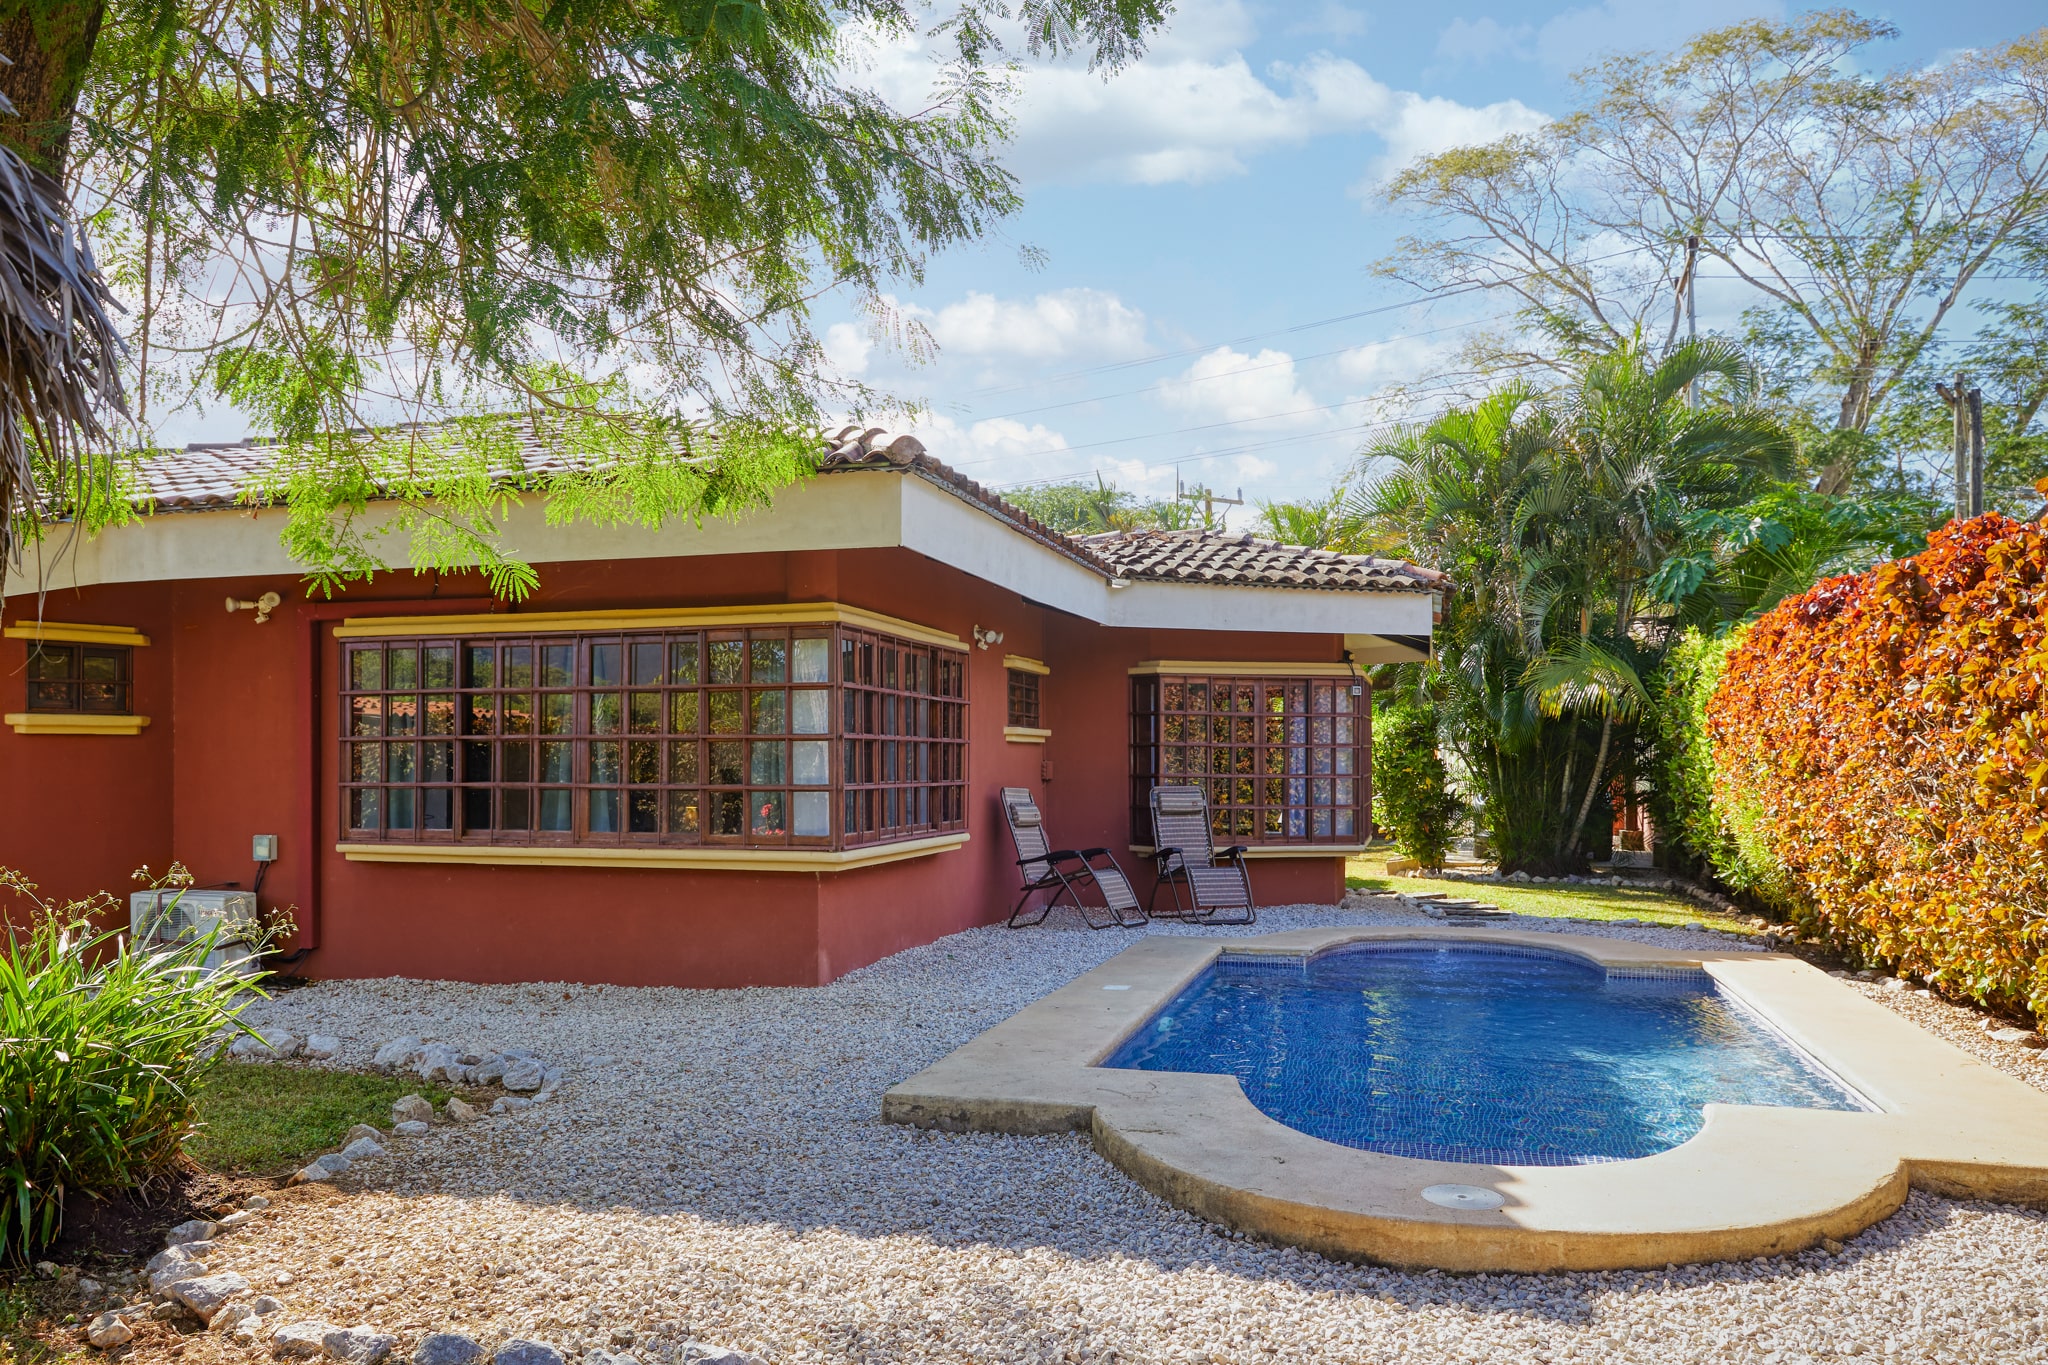 Casa Lauro Property for Sale – Walk to the Beach!